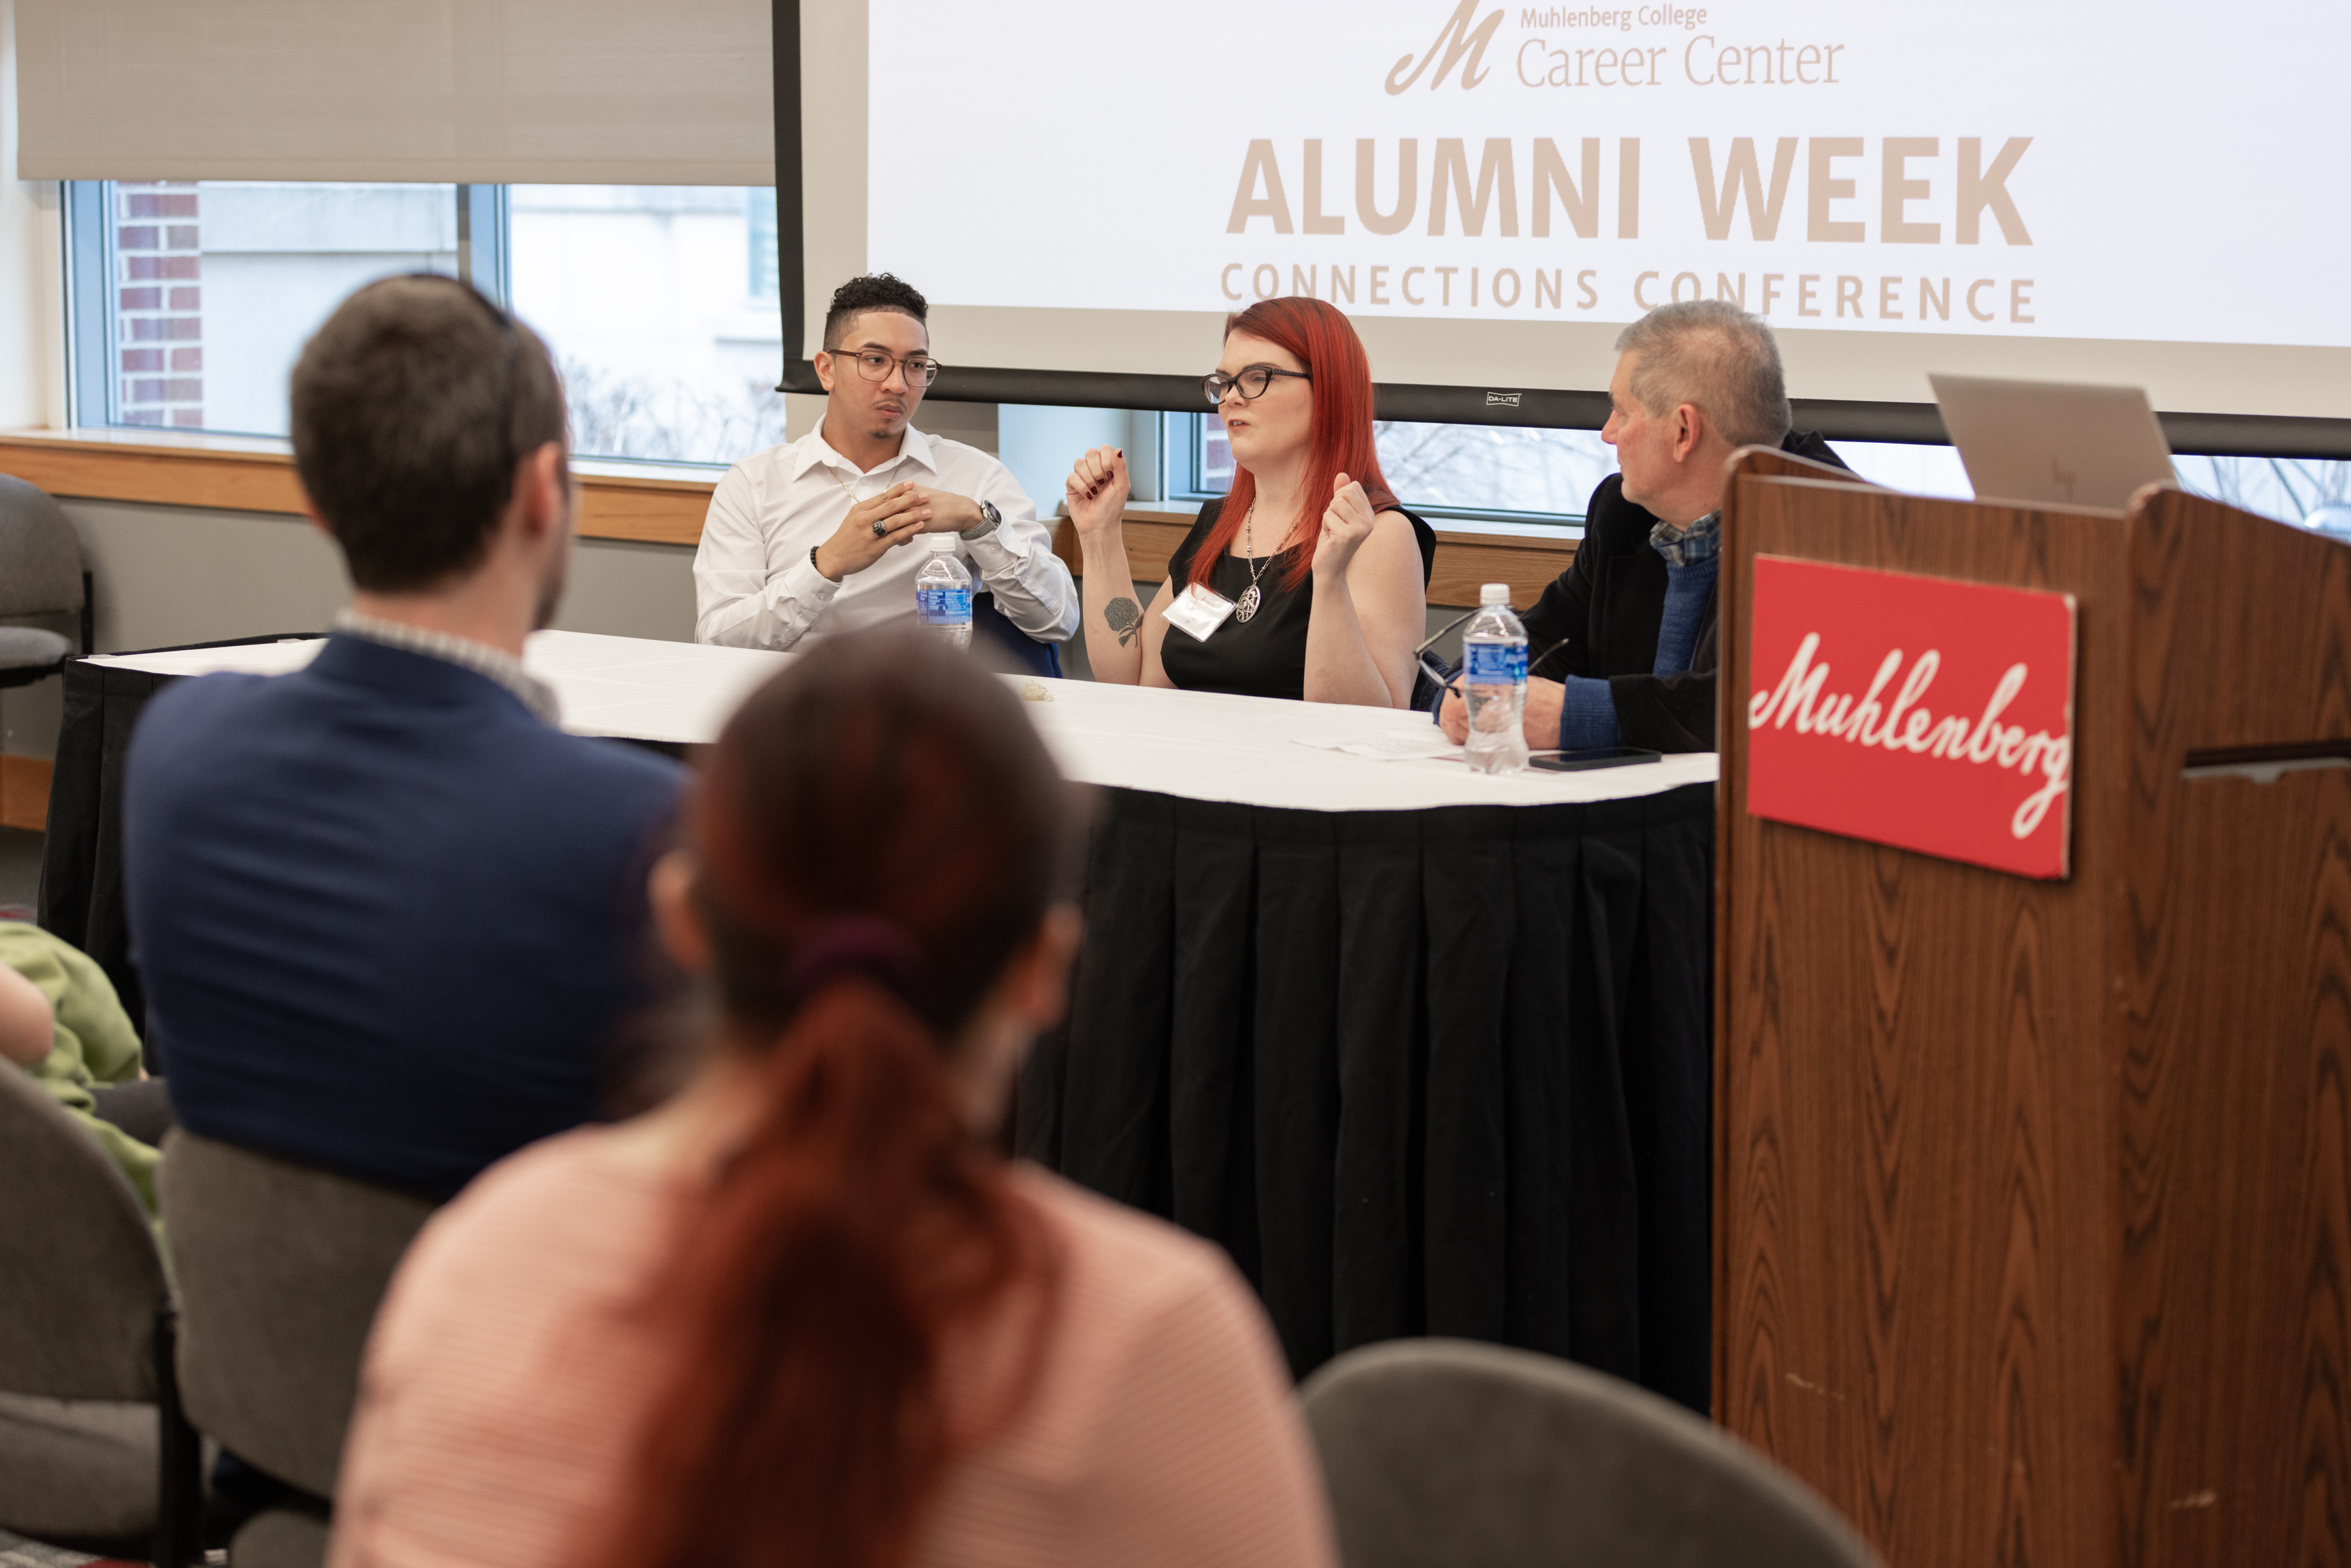 Three adults sit in front of a screen that says Alumni Week having a discussion in front of an audience